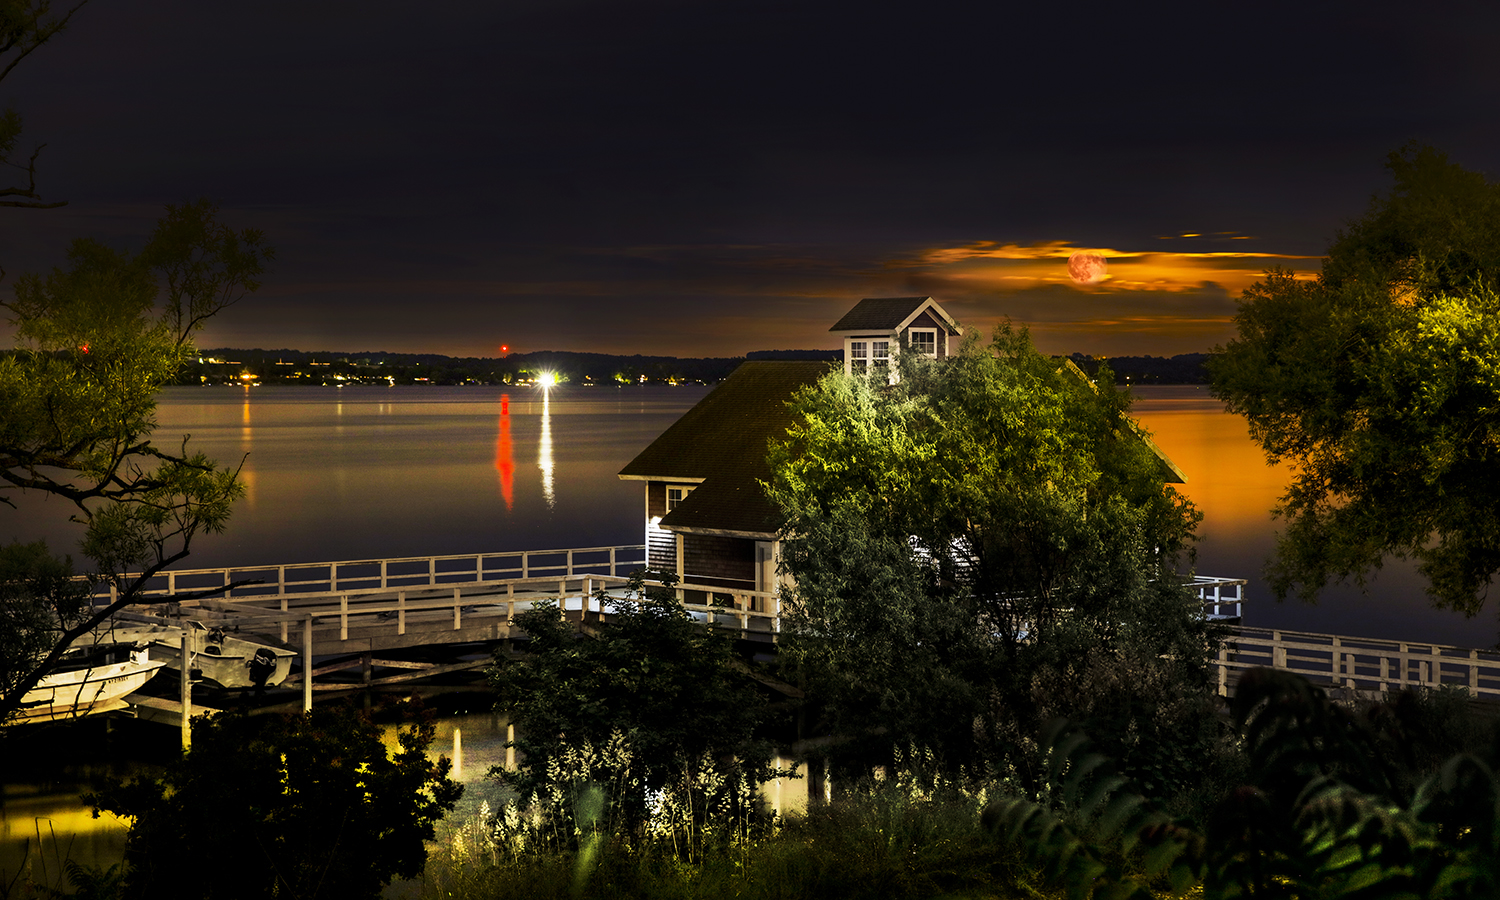 In this special edition of TWIP, we showcase the sweeping vistas of the FLX Region through photographs taken by Chief Photographer Kevin Colton. Here, the Buck Moon shines over Seneca Lake and the Bozzuto Boathouse.